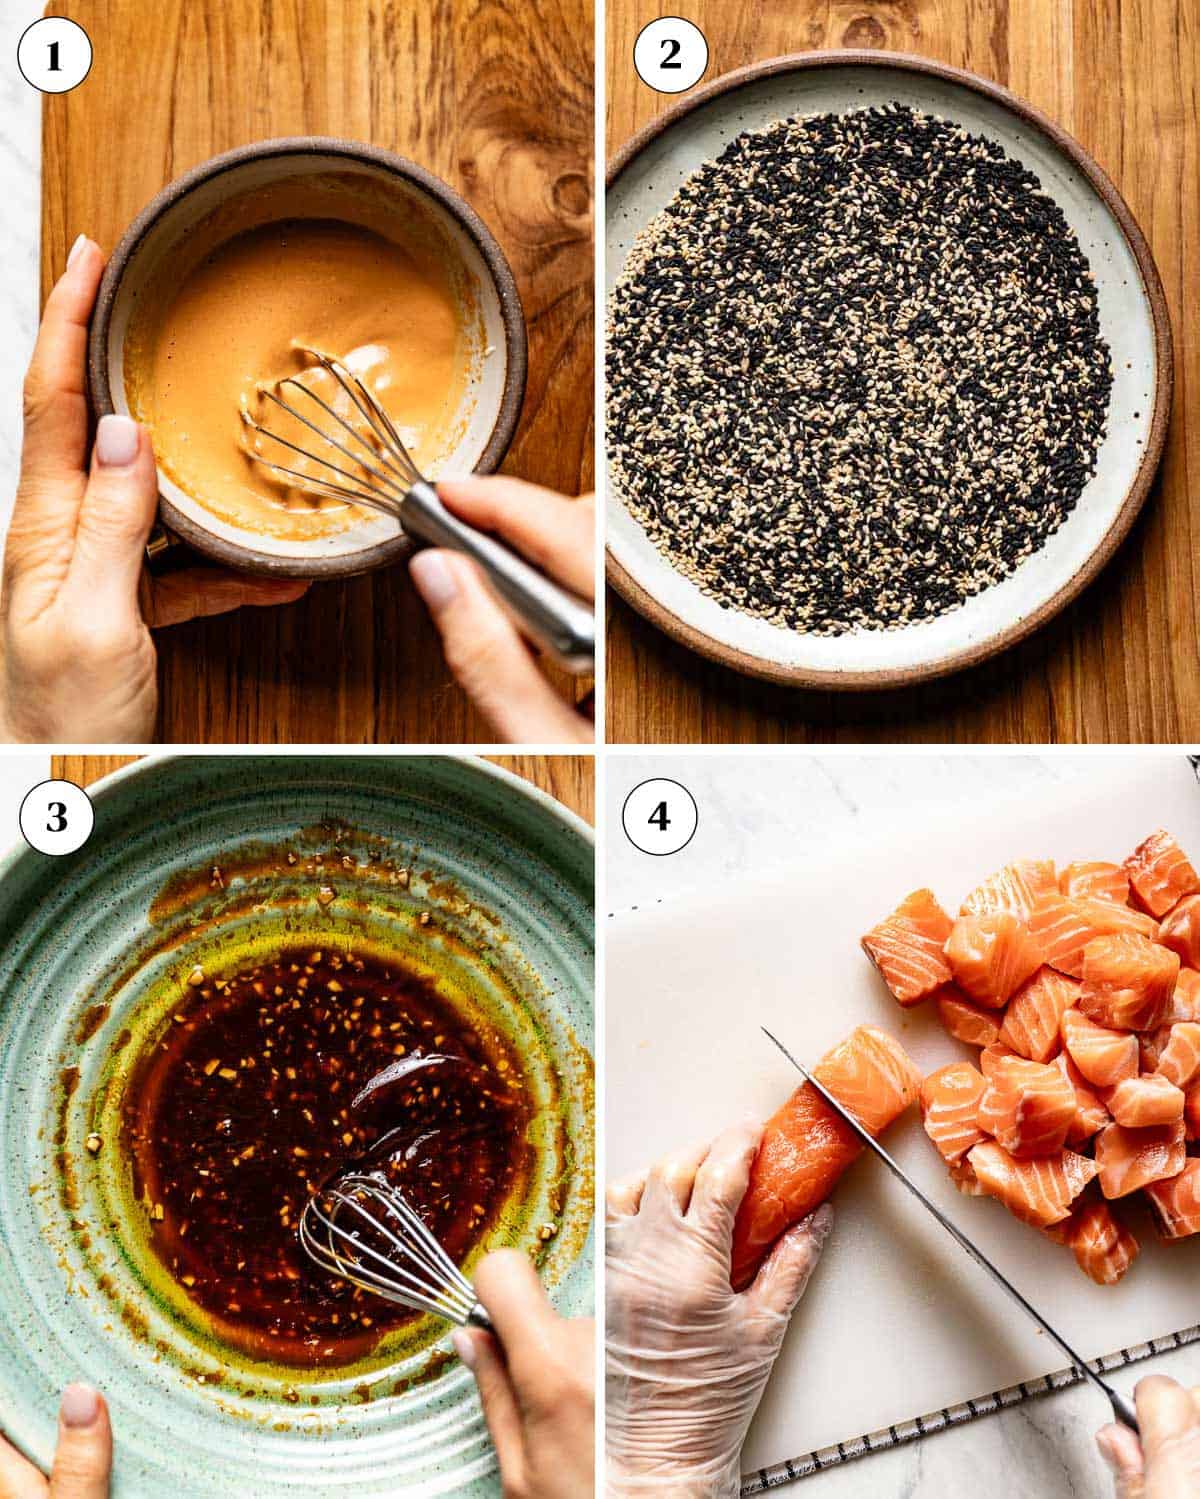 A collage of images showing how to make sesame seed crusted salmon.